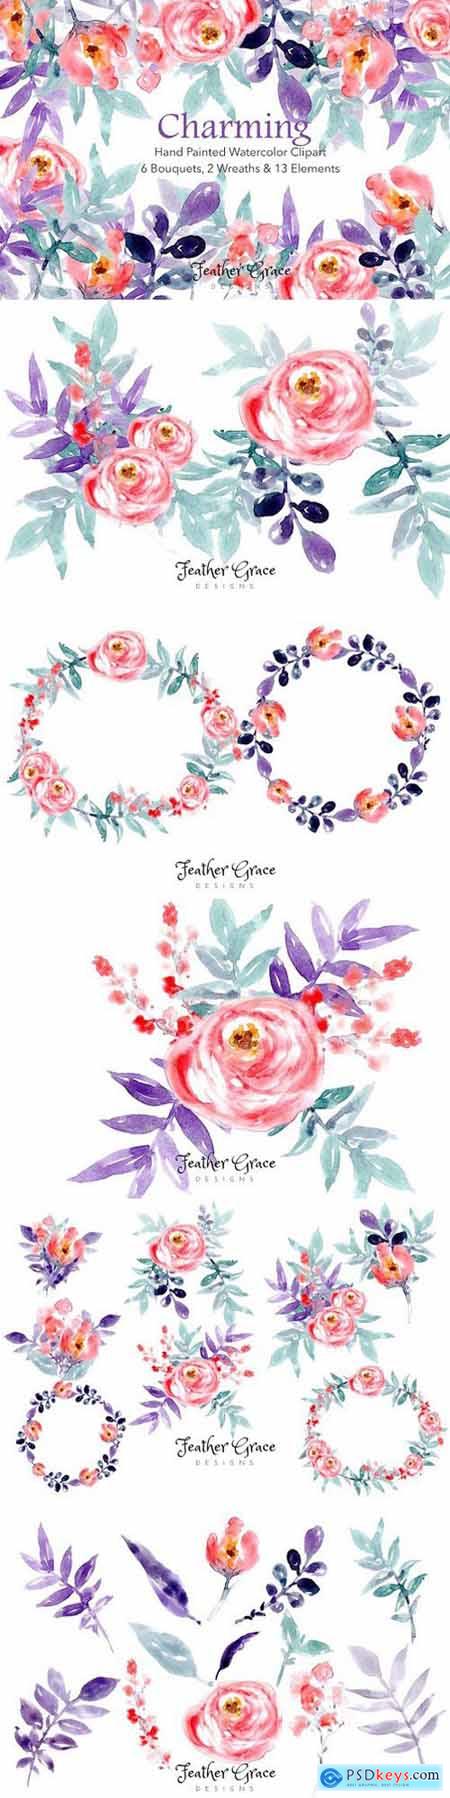 Charming Floral Collection - Hand Painted Watercolor Clip Art